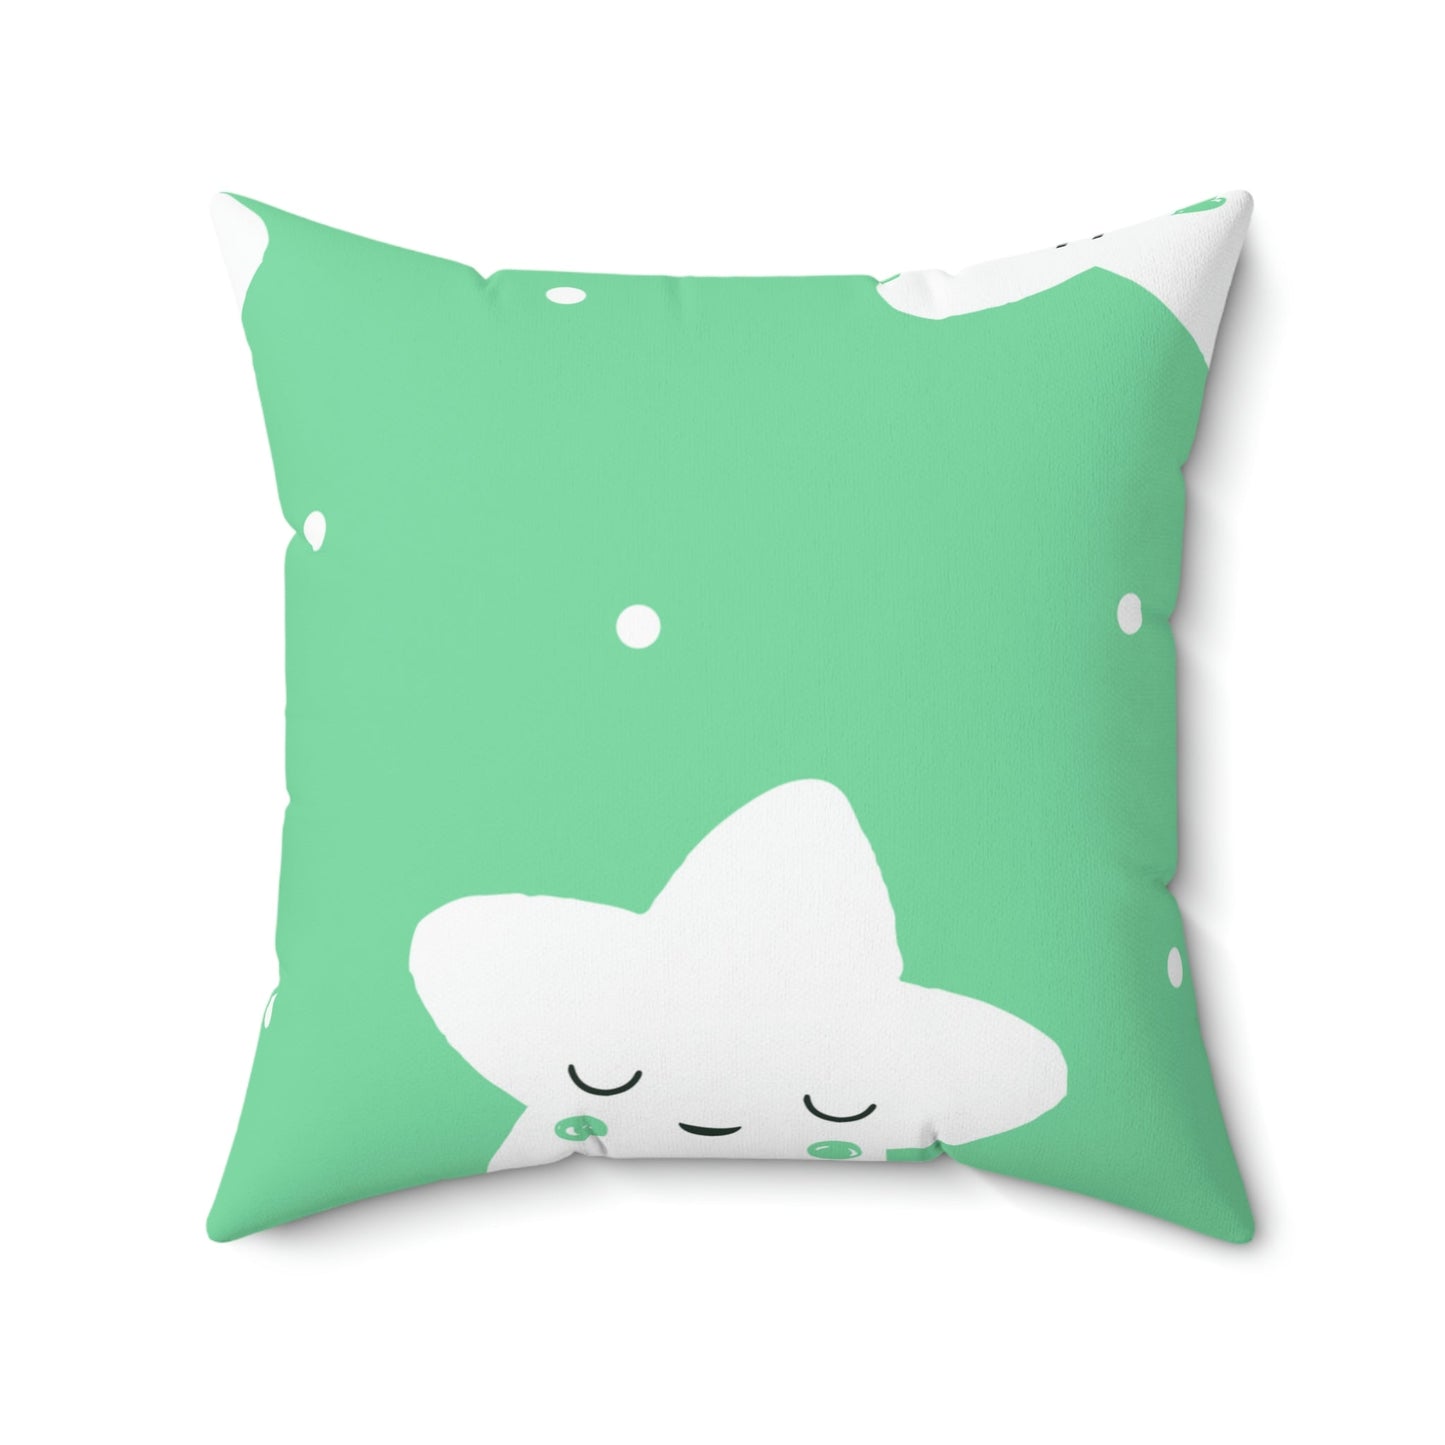 Sleepy Baby Star Green Square Pillow Home Decor Pink Sweetheart